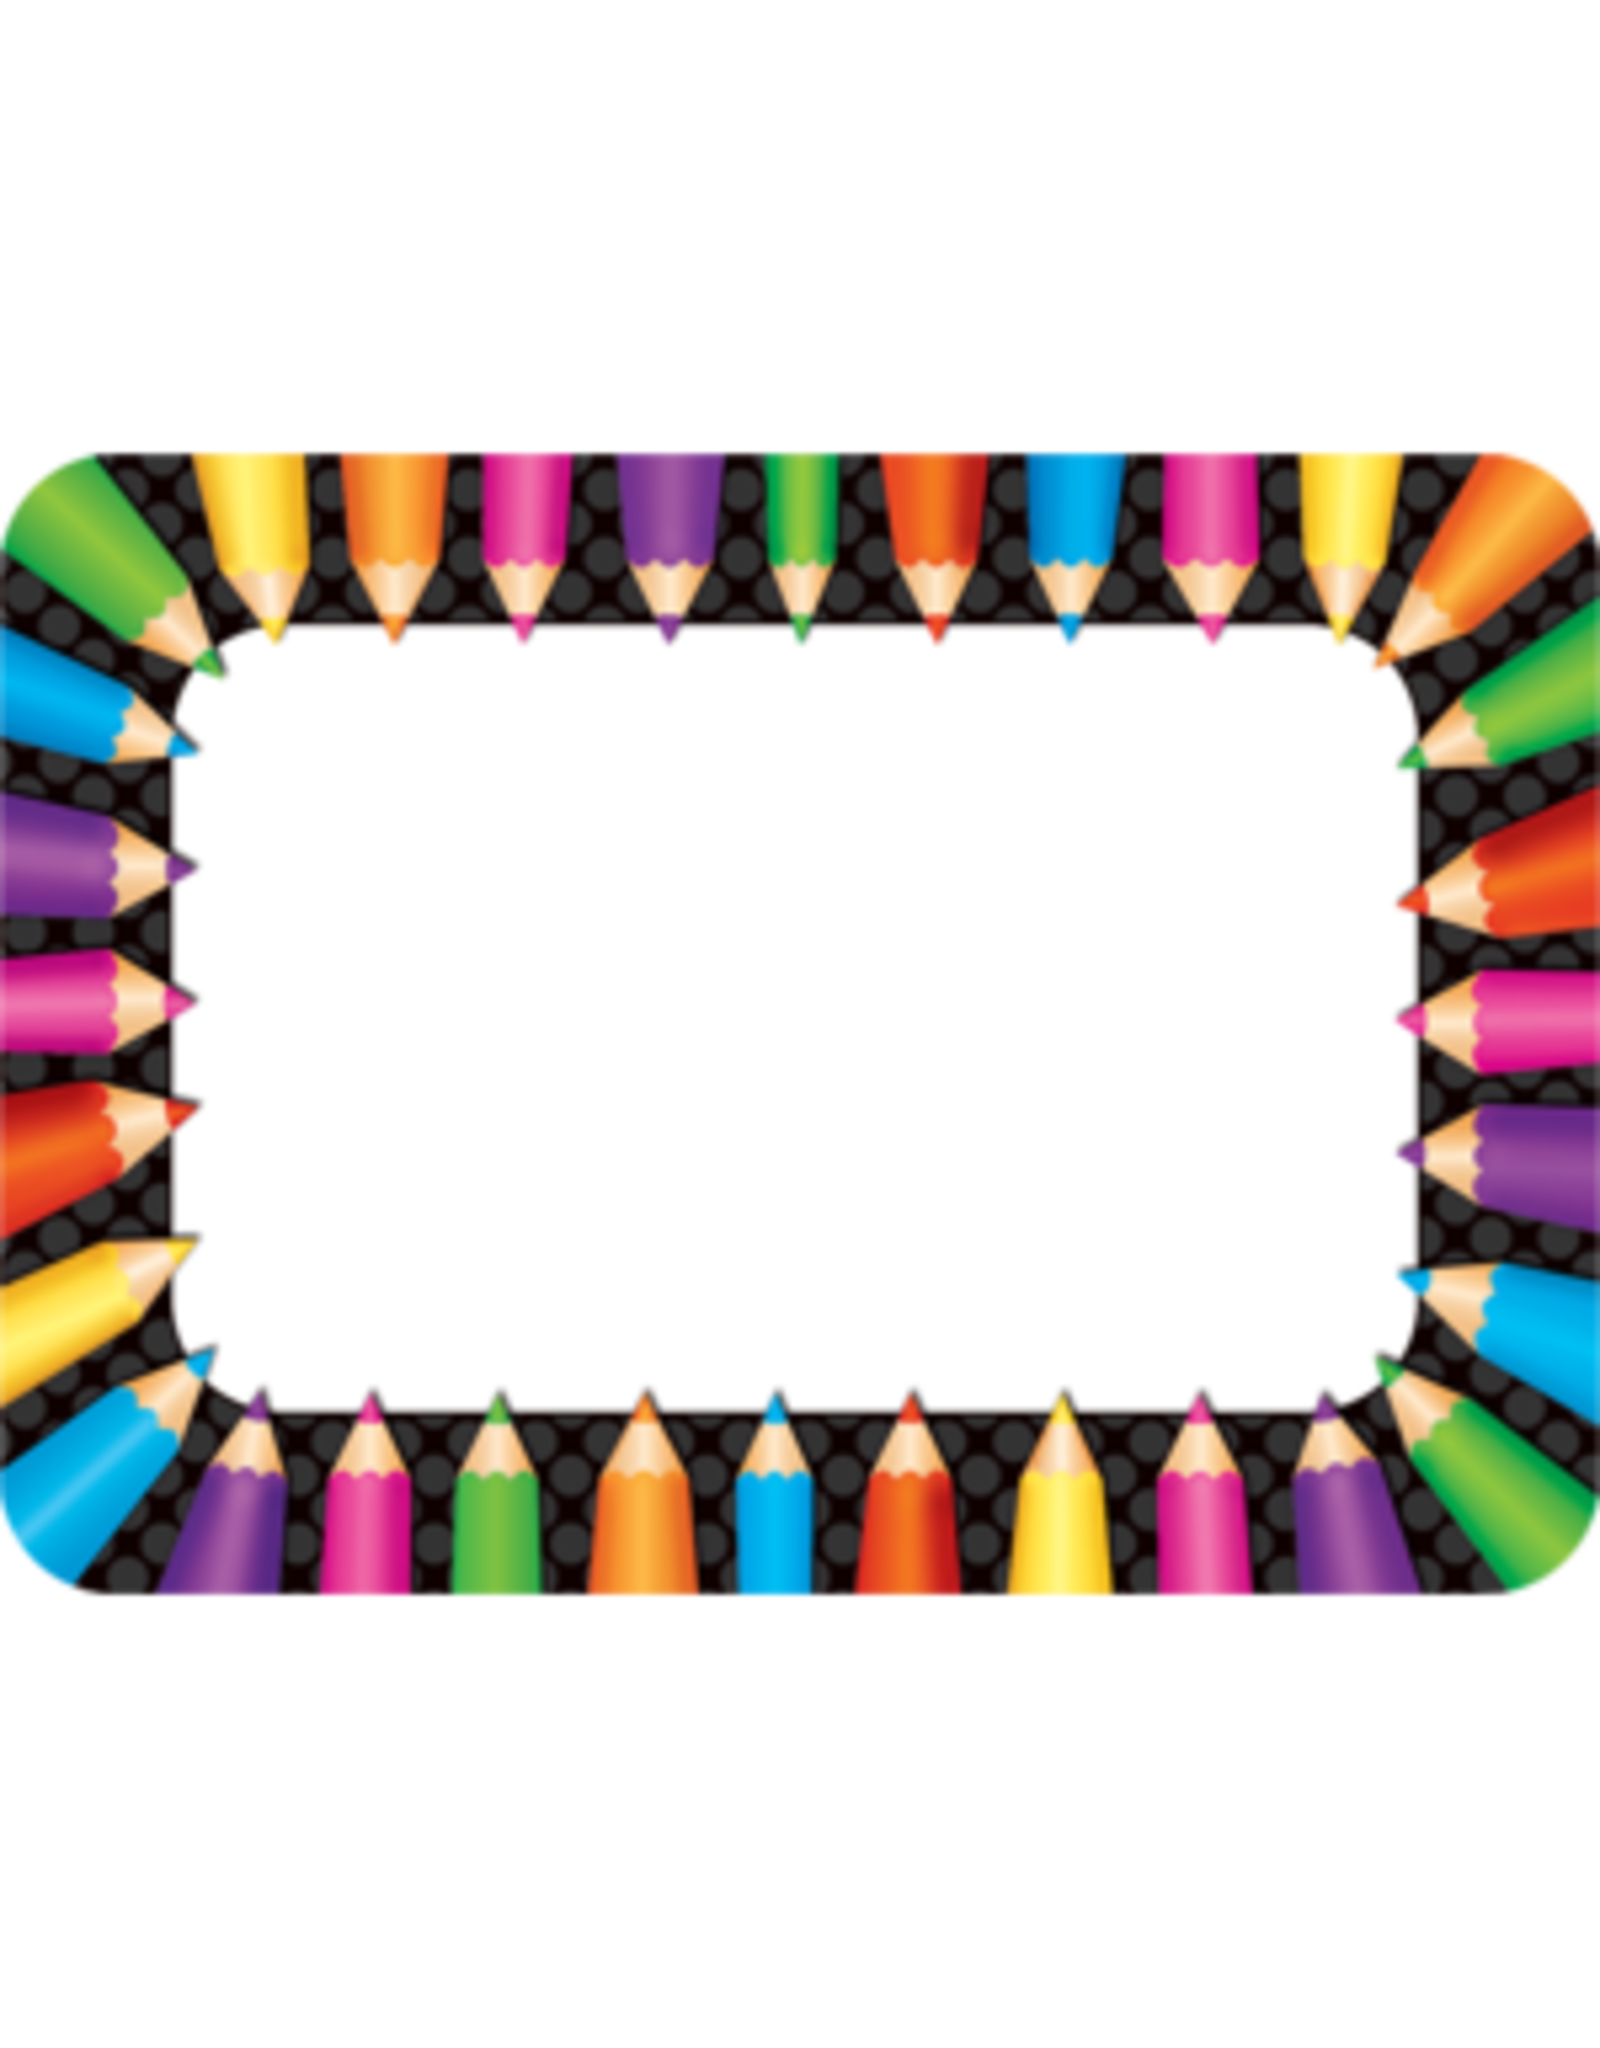 NAME TAGS: COLORED PENCILS 36 PACK